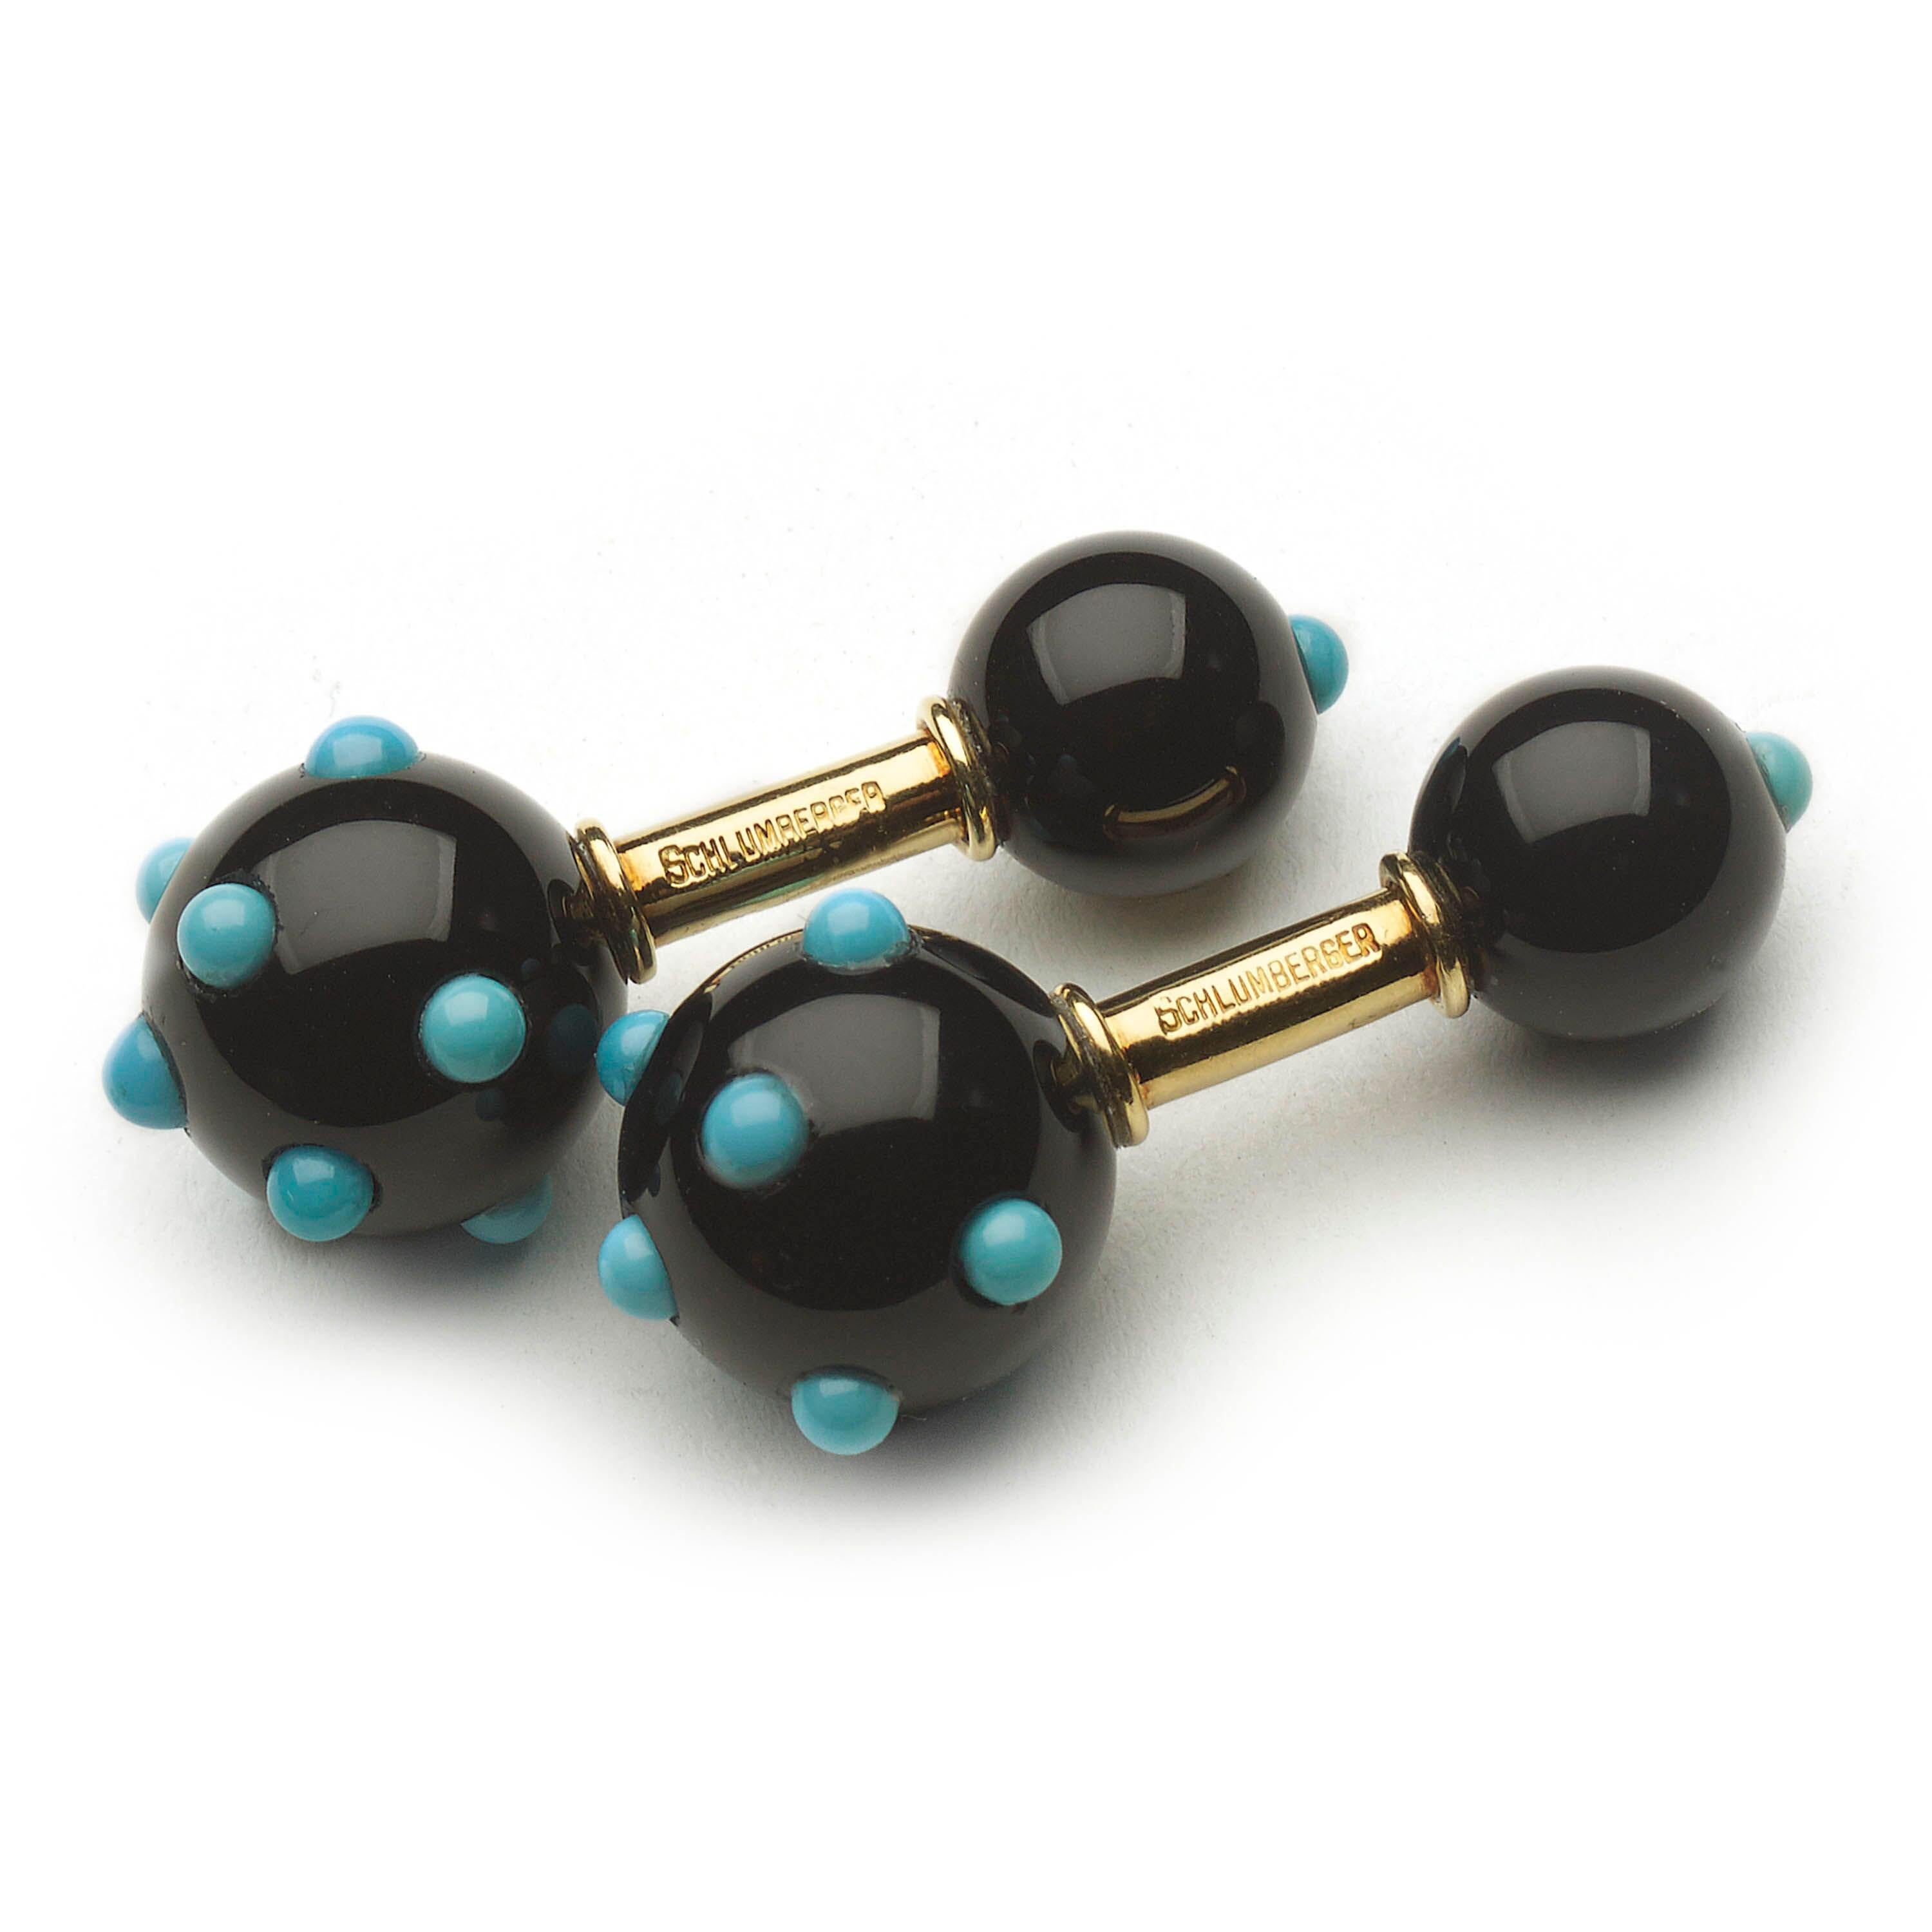 A pair of Jean Schlumberger for Tiffany & Co. black onyx and turquoise cufflinks, with turquoise studded black onyx spheres, on 18ct gold, signed Schlumberger and Tiffany & Co., stamped 18K, circa 1960.